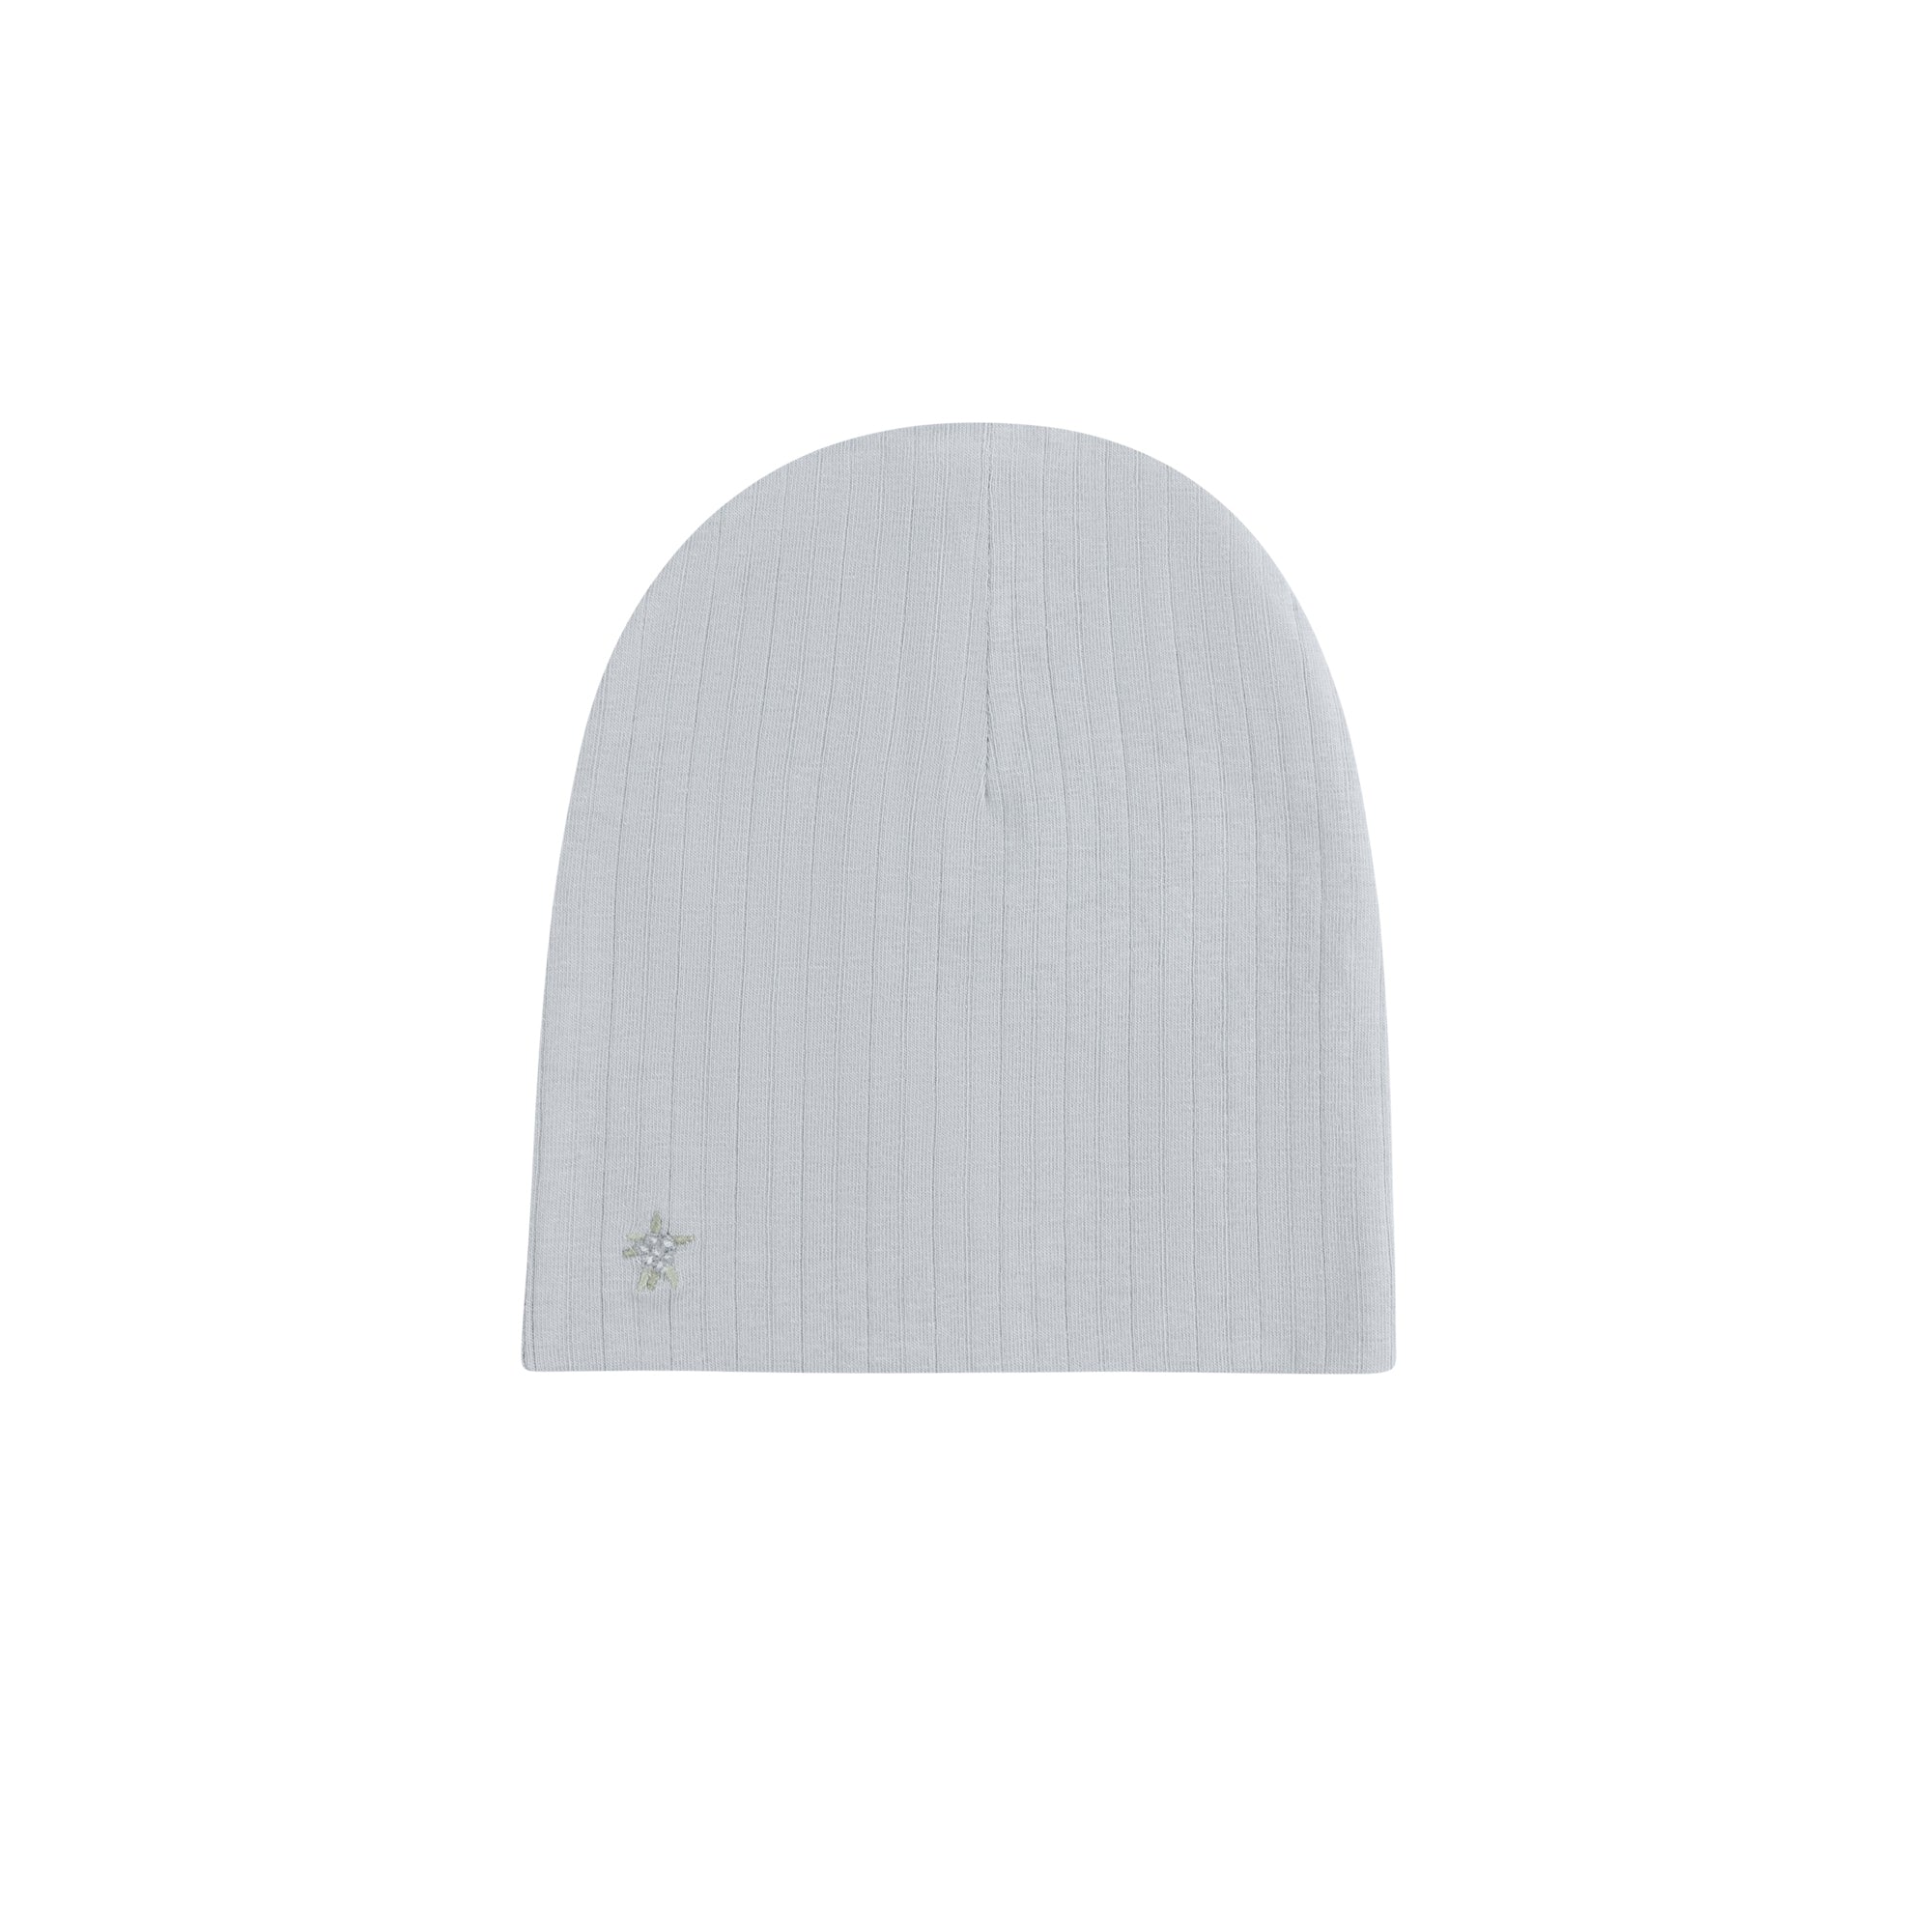 Wide Rib Cotton - Rosebud Collection - Beanie